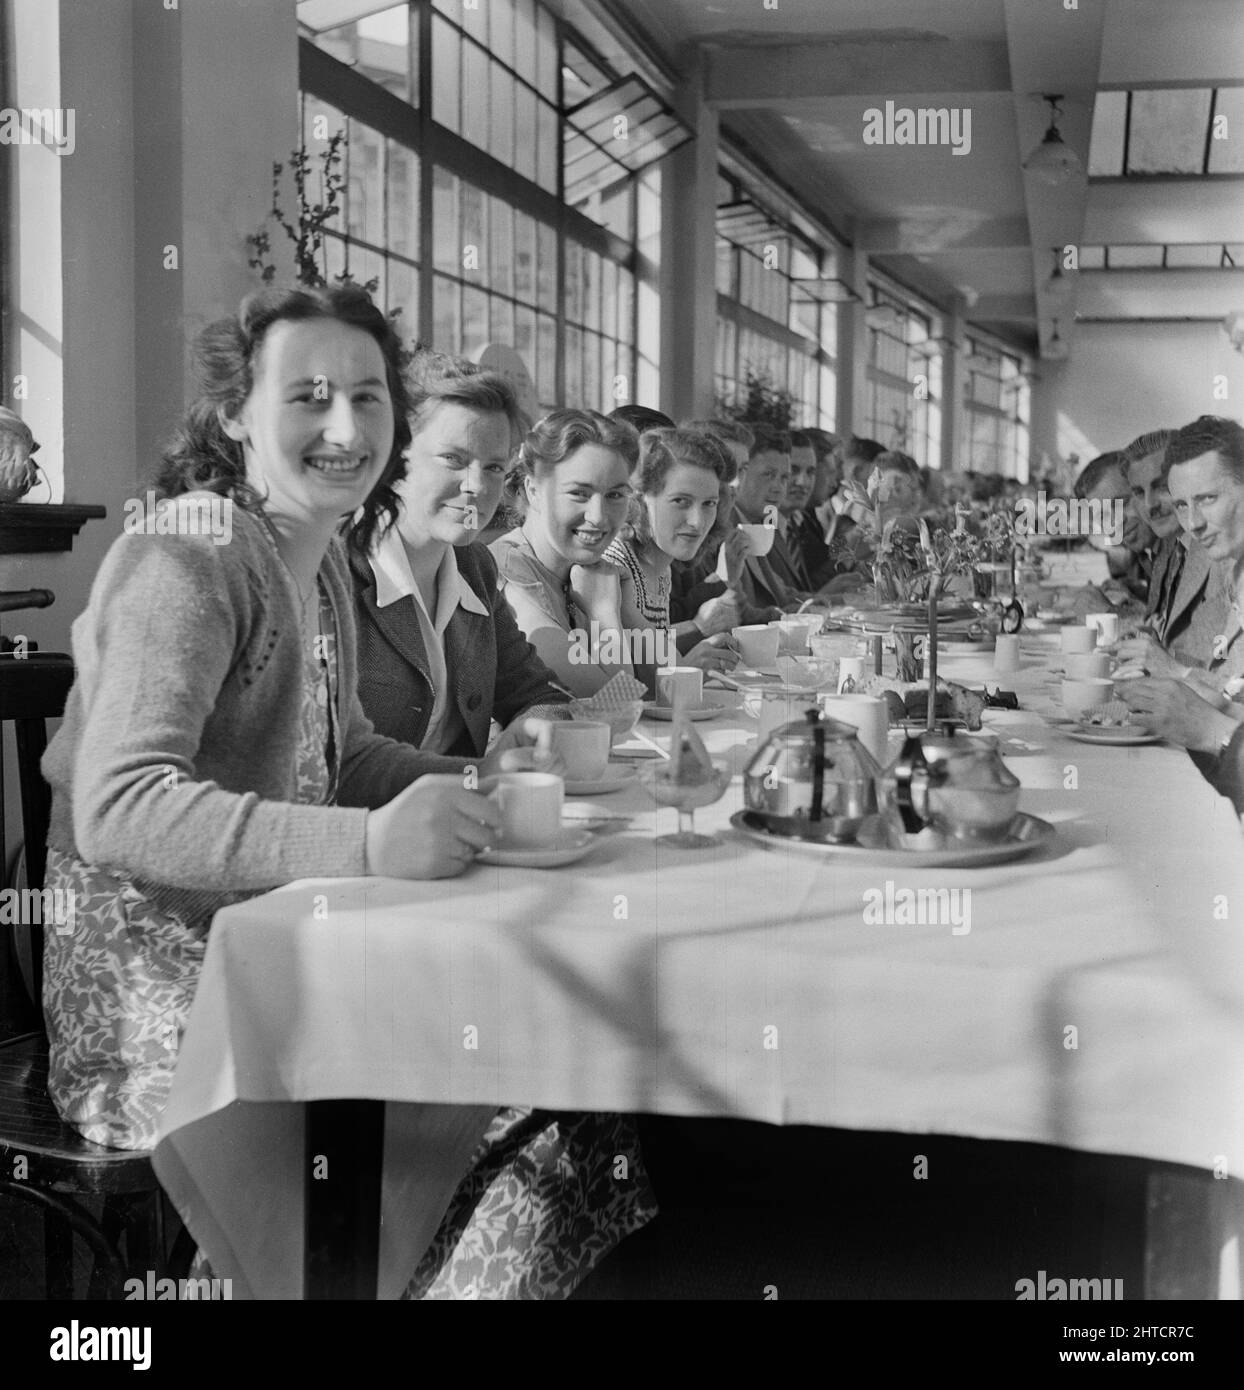 The Spa, Bridlington, East Riding of Yorkshire, 19/06/1948. A group of people having lunch at a long table in the Spa Cafe during a day trip of Laing staff to Bridlington. This day trip was for contracts in the North West area, including those at Darlington, Doncaster, Bolton on Dearne, Stubbs Wood, Huddersfield and Wigfield. W. K. Laing also joined the outing. Stock Photo